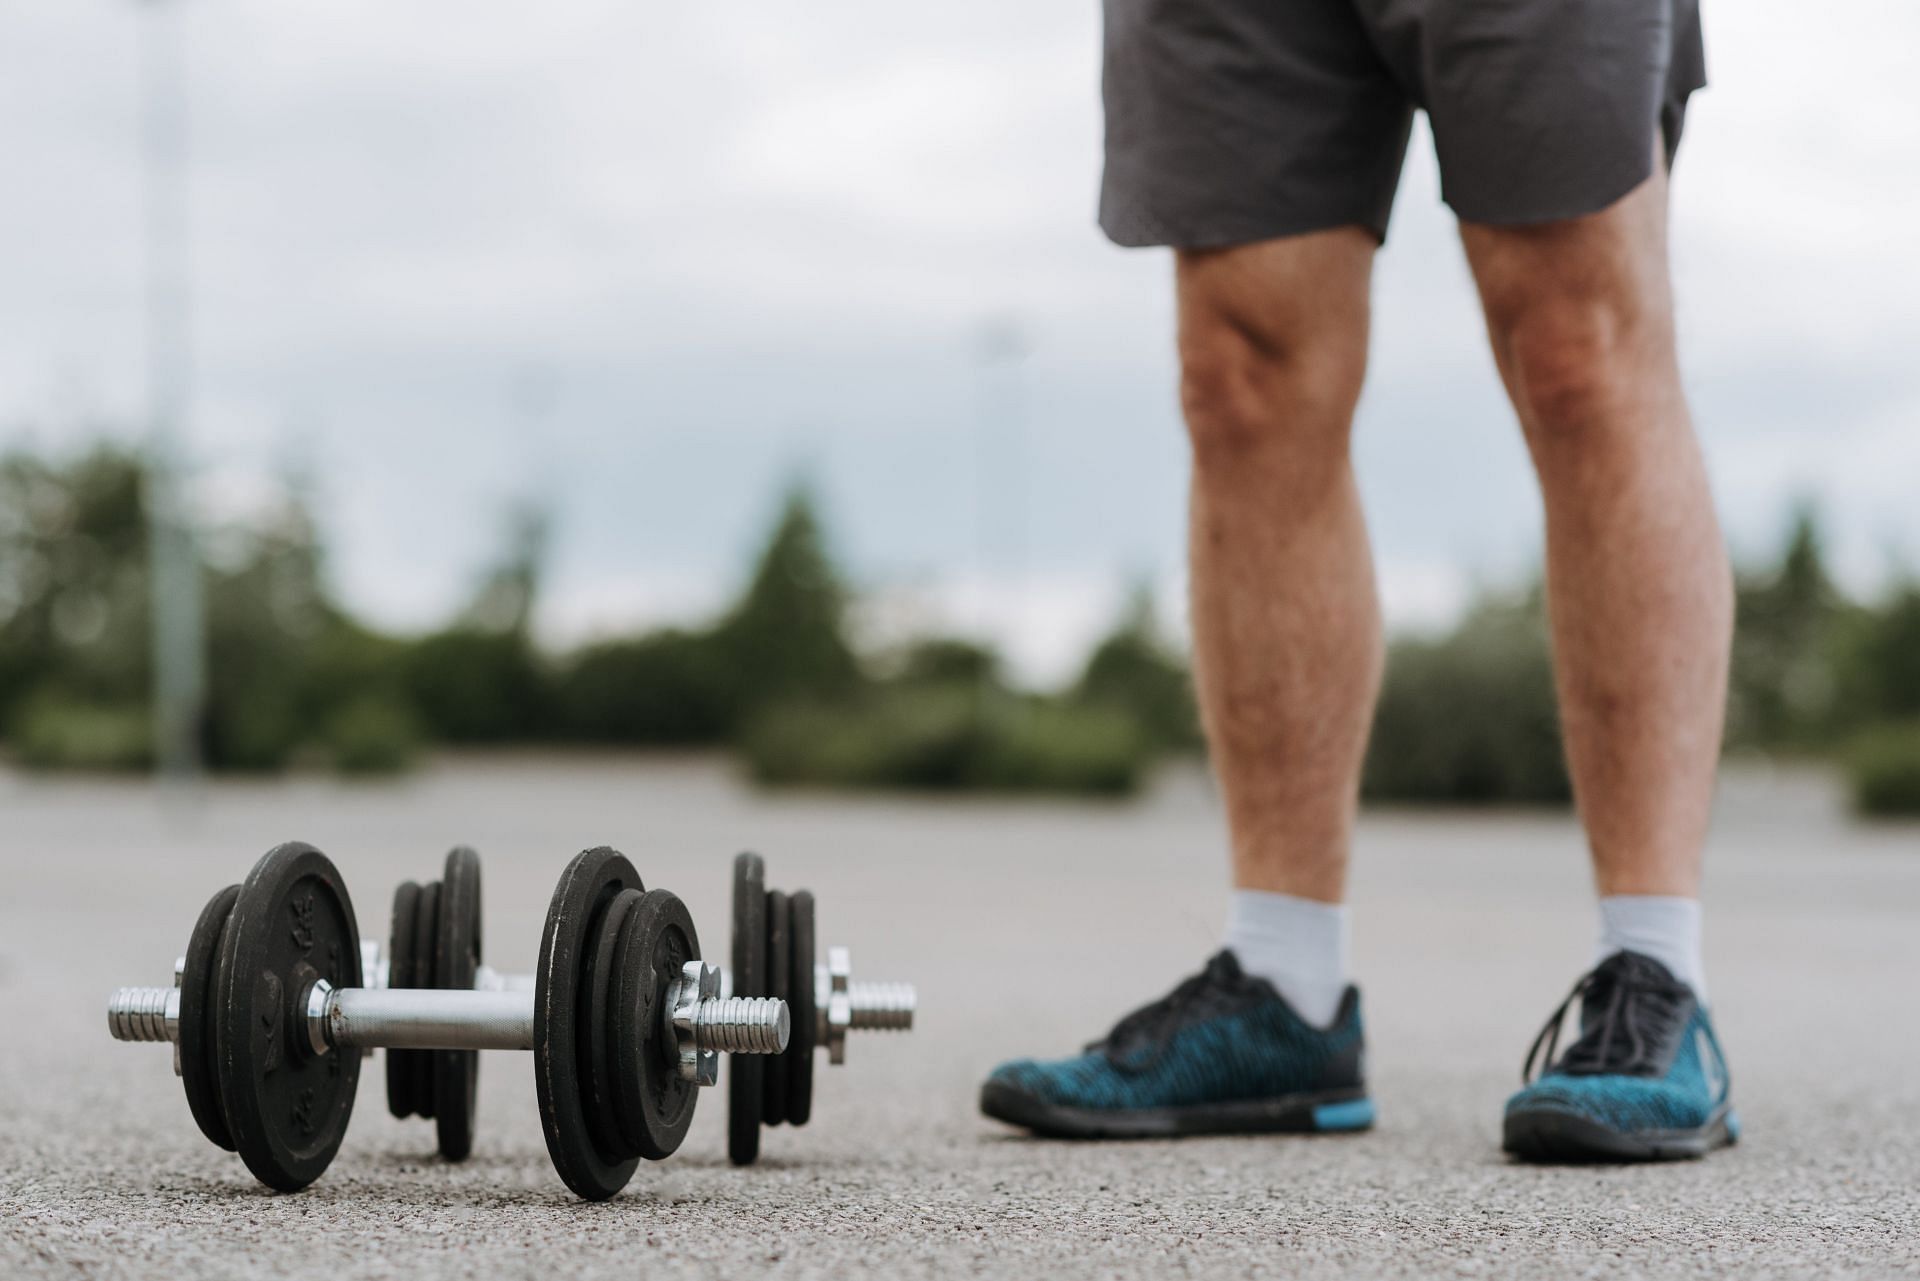 8 tips to prevent calluses from weight lifting (Image sourced via Pexels / Photo by Anete)